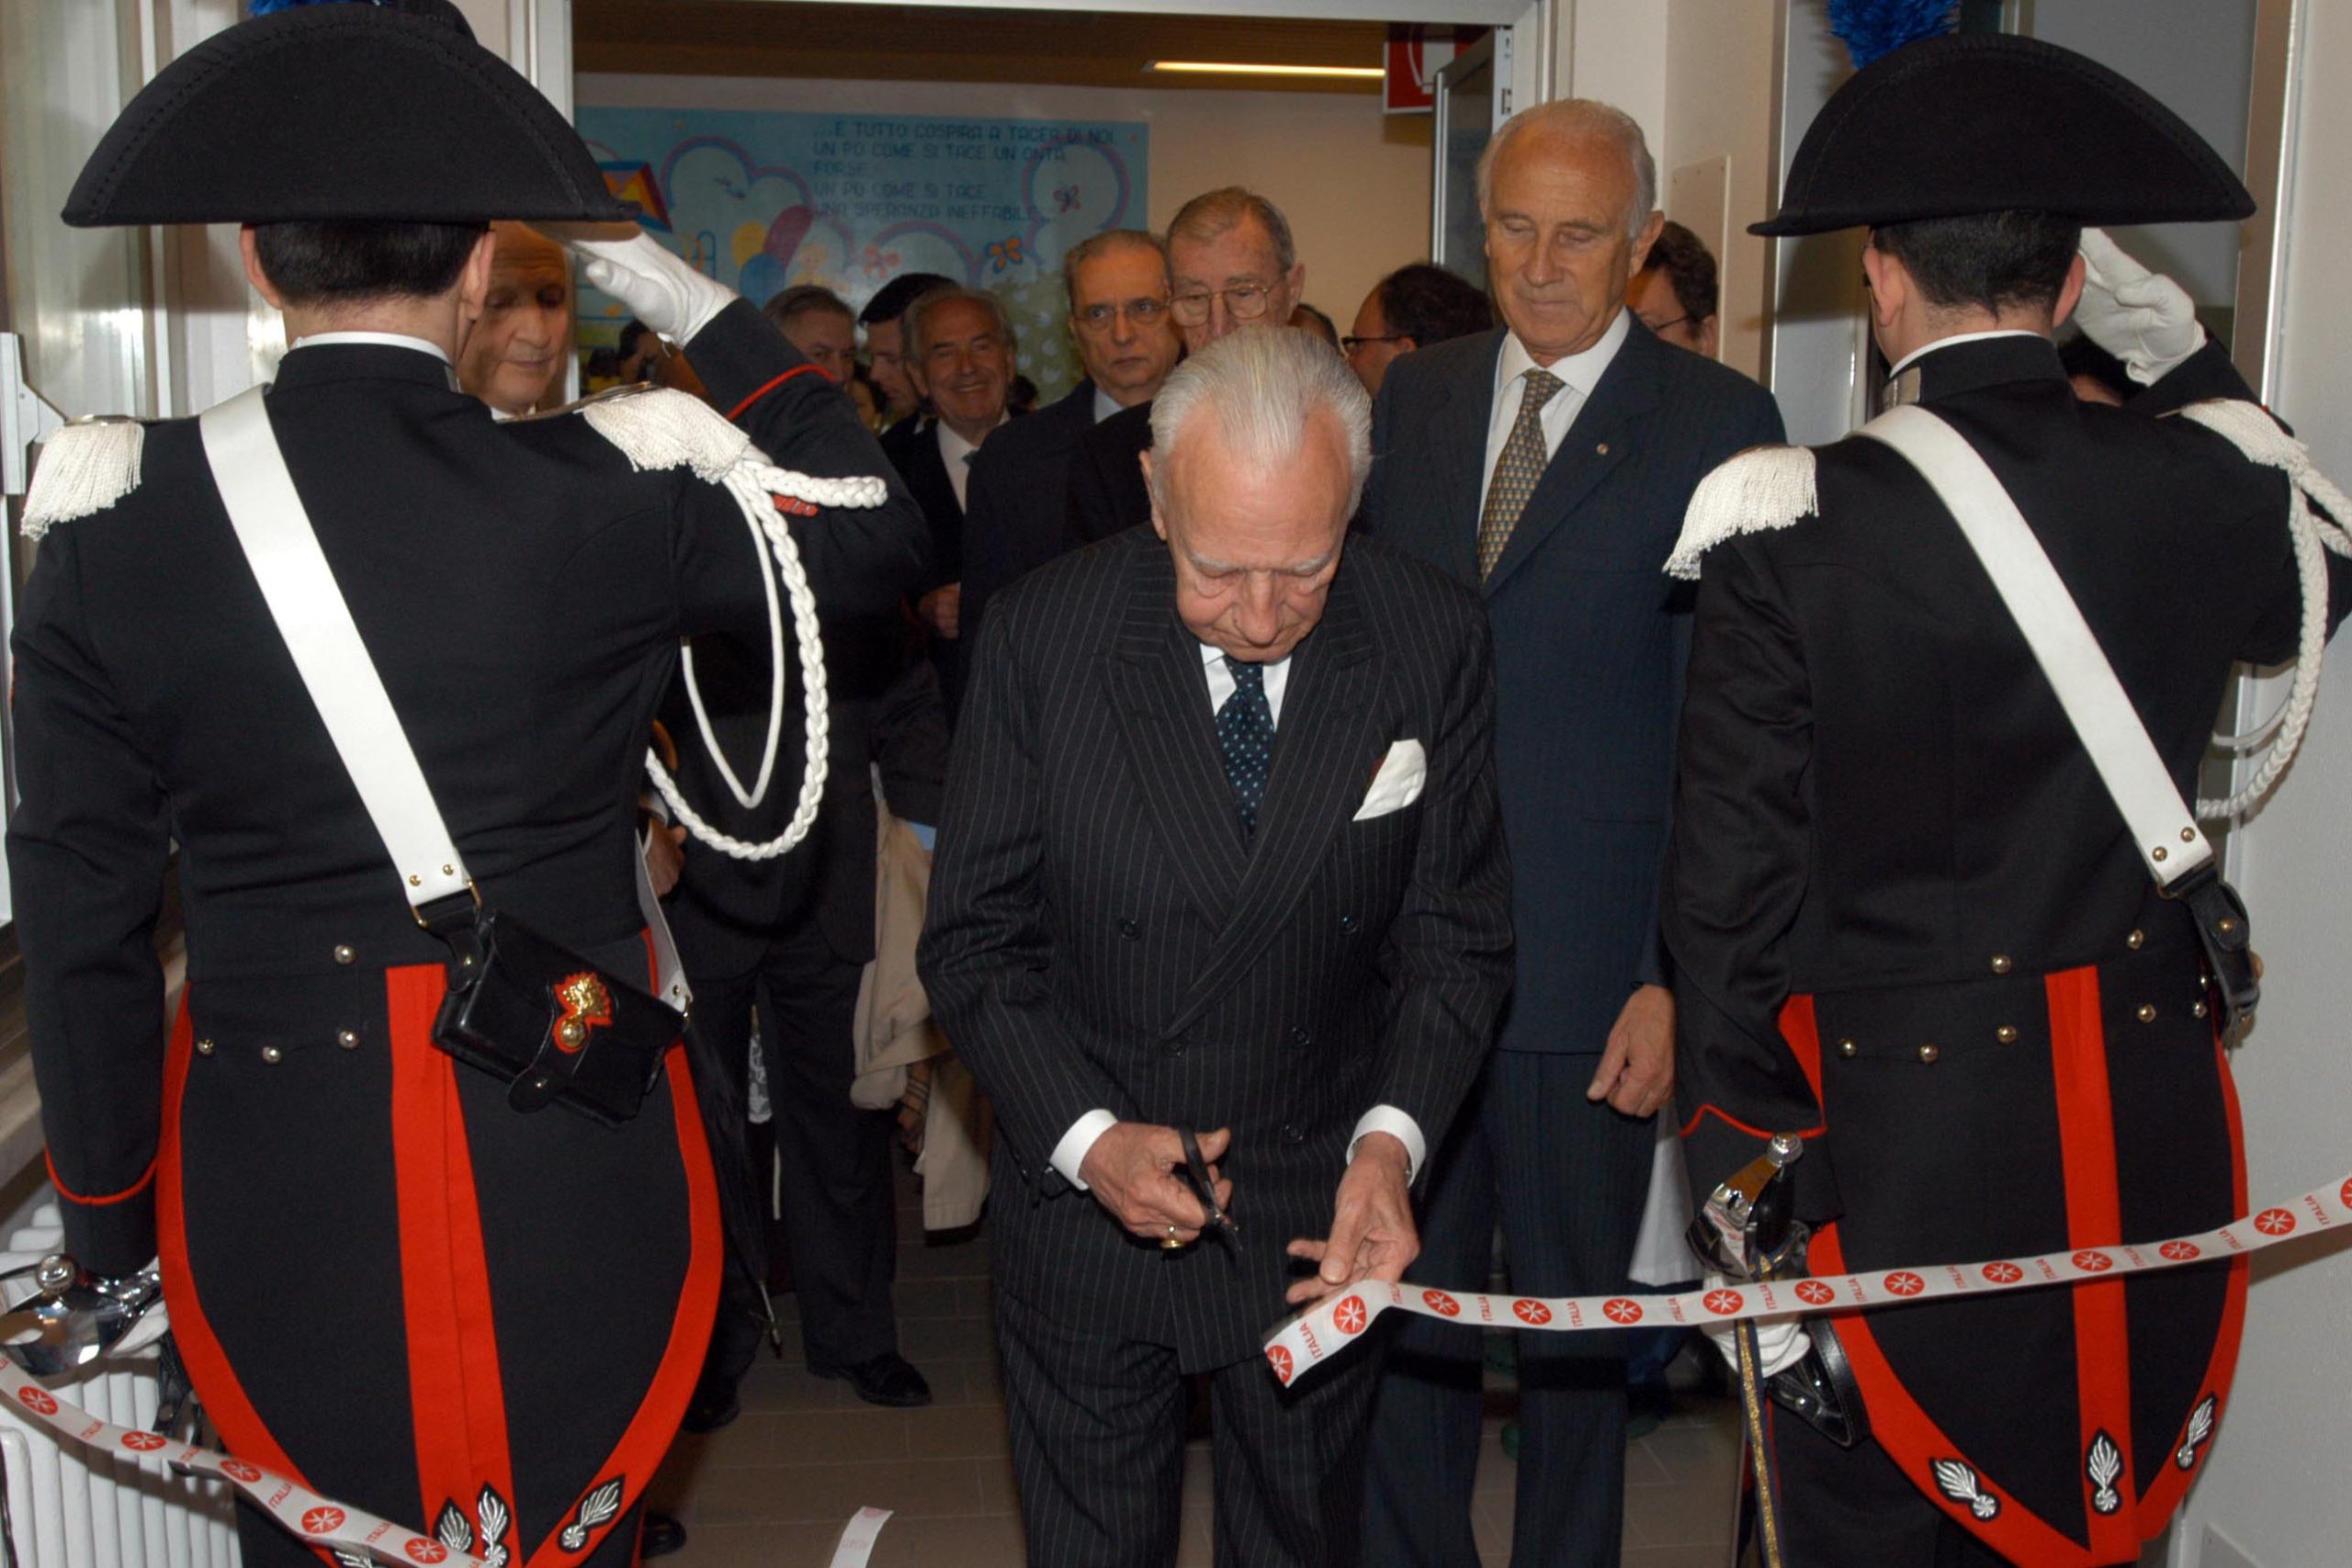 The department of neurosurgery inaugurated in the Gaslini hospital